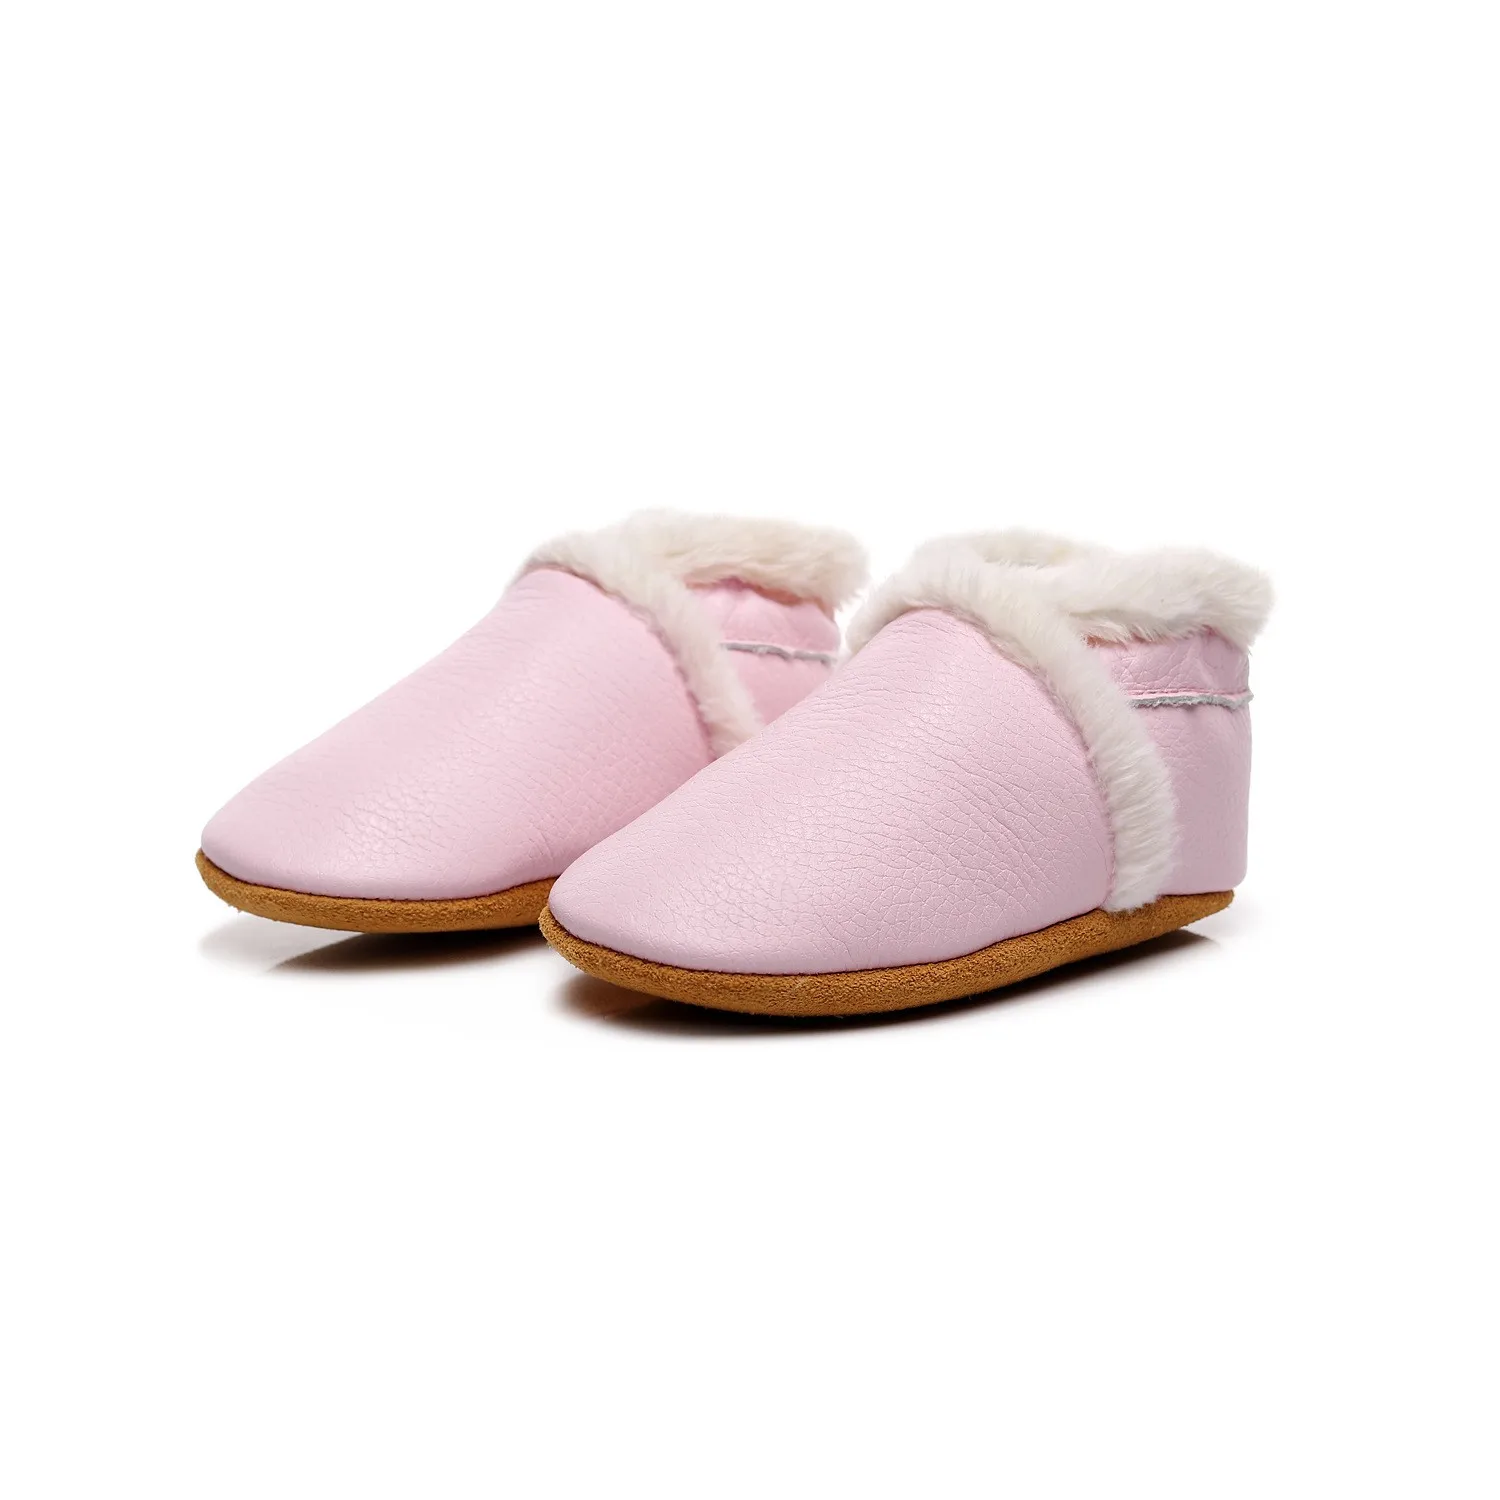 winter baby shoes 20